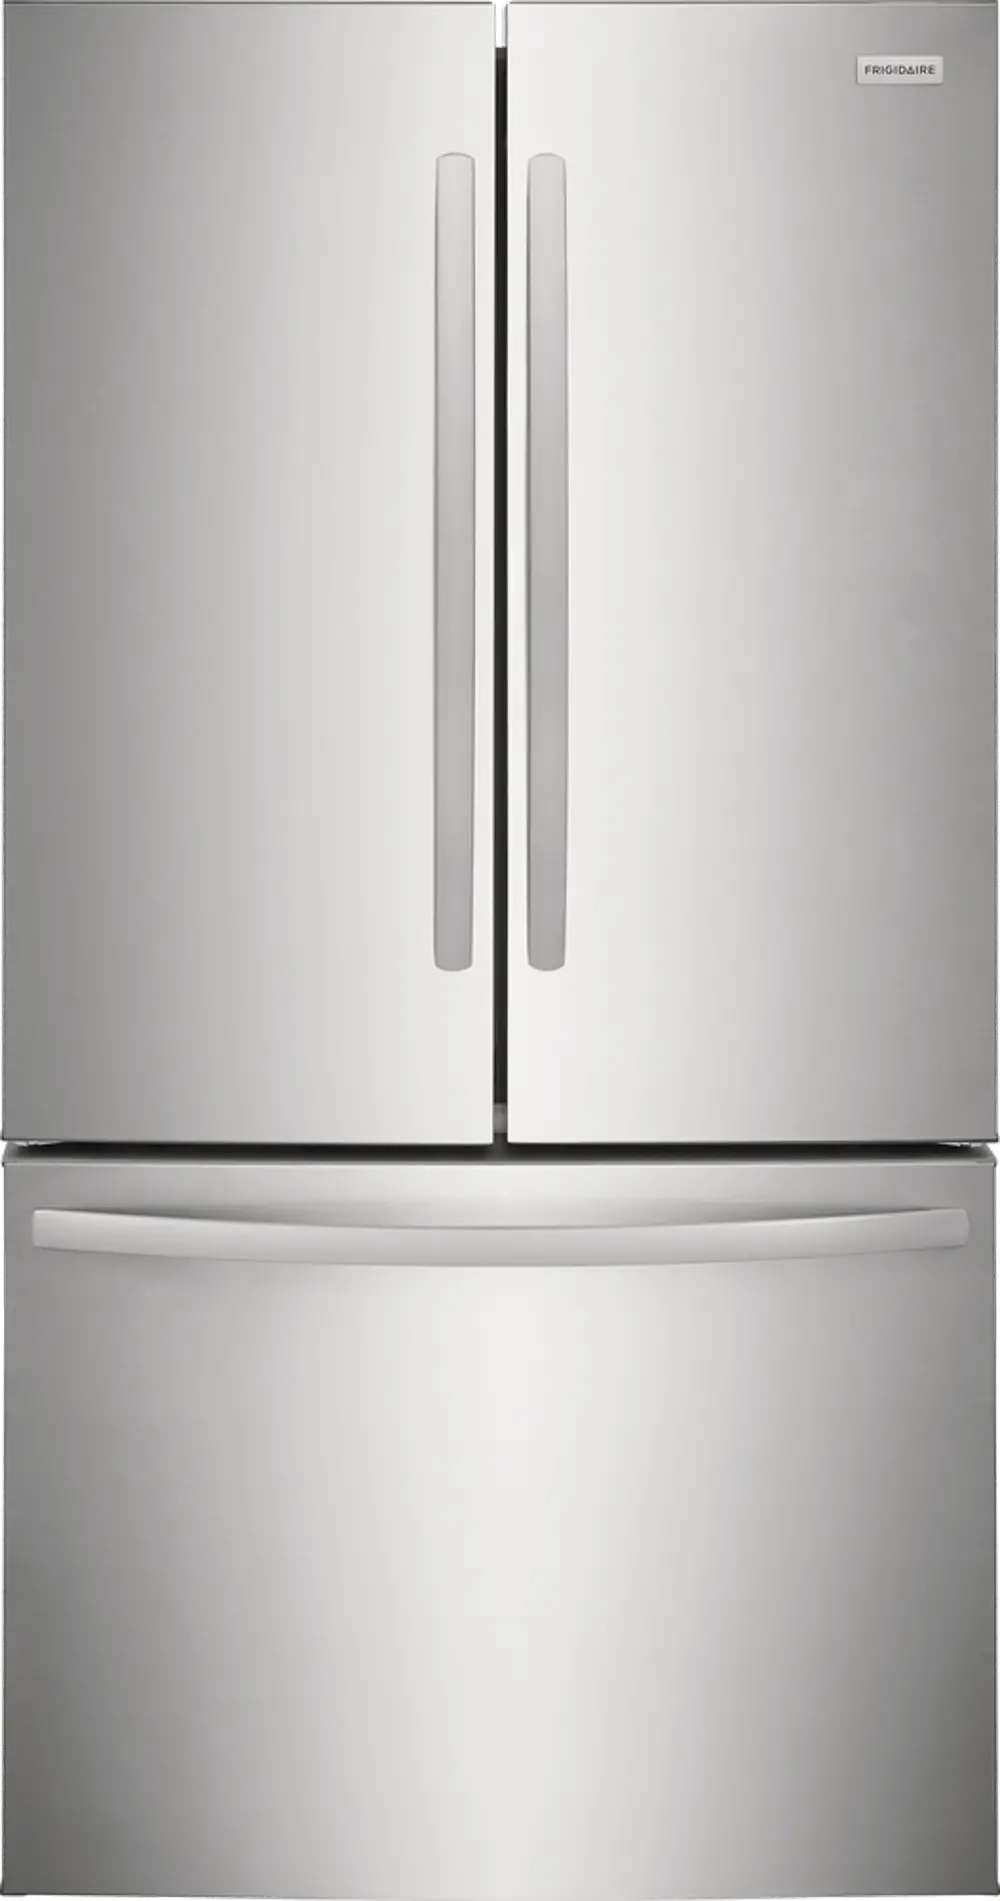 FRFN2823AS Frigidaire 28.8 cu ft French Door Refrigerator - Stainless Steel-1